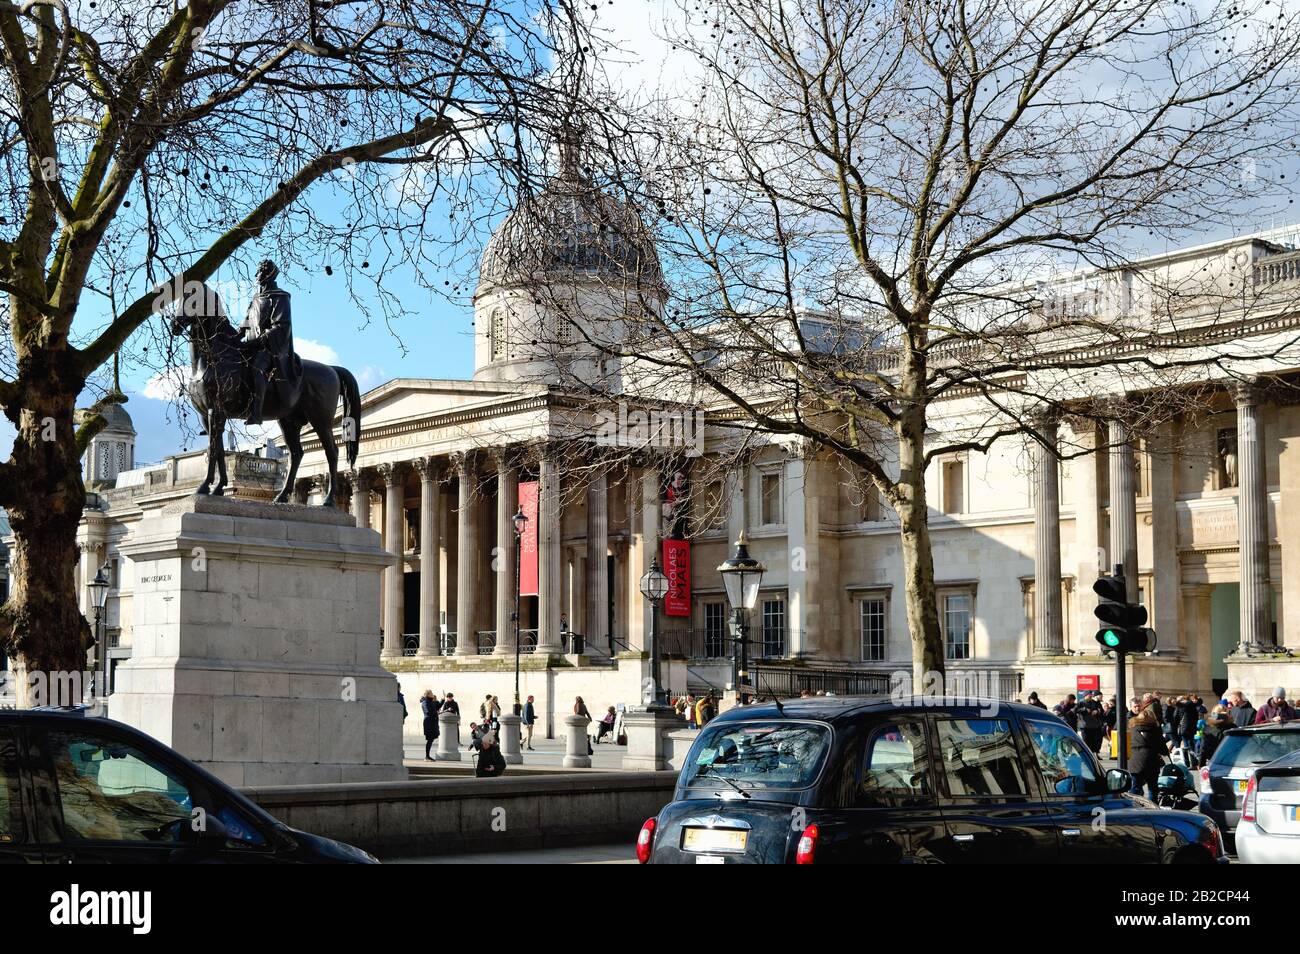 Exterior of the National Gallery, Trafalgar Square, Central London England UK Stock Photo